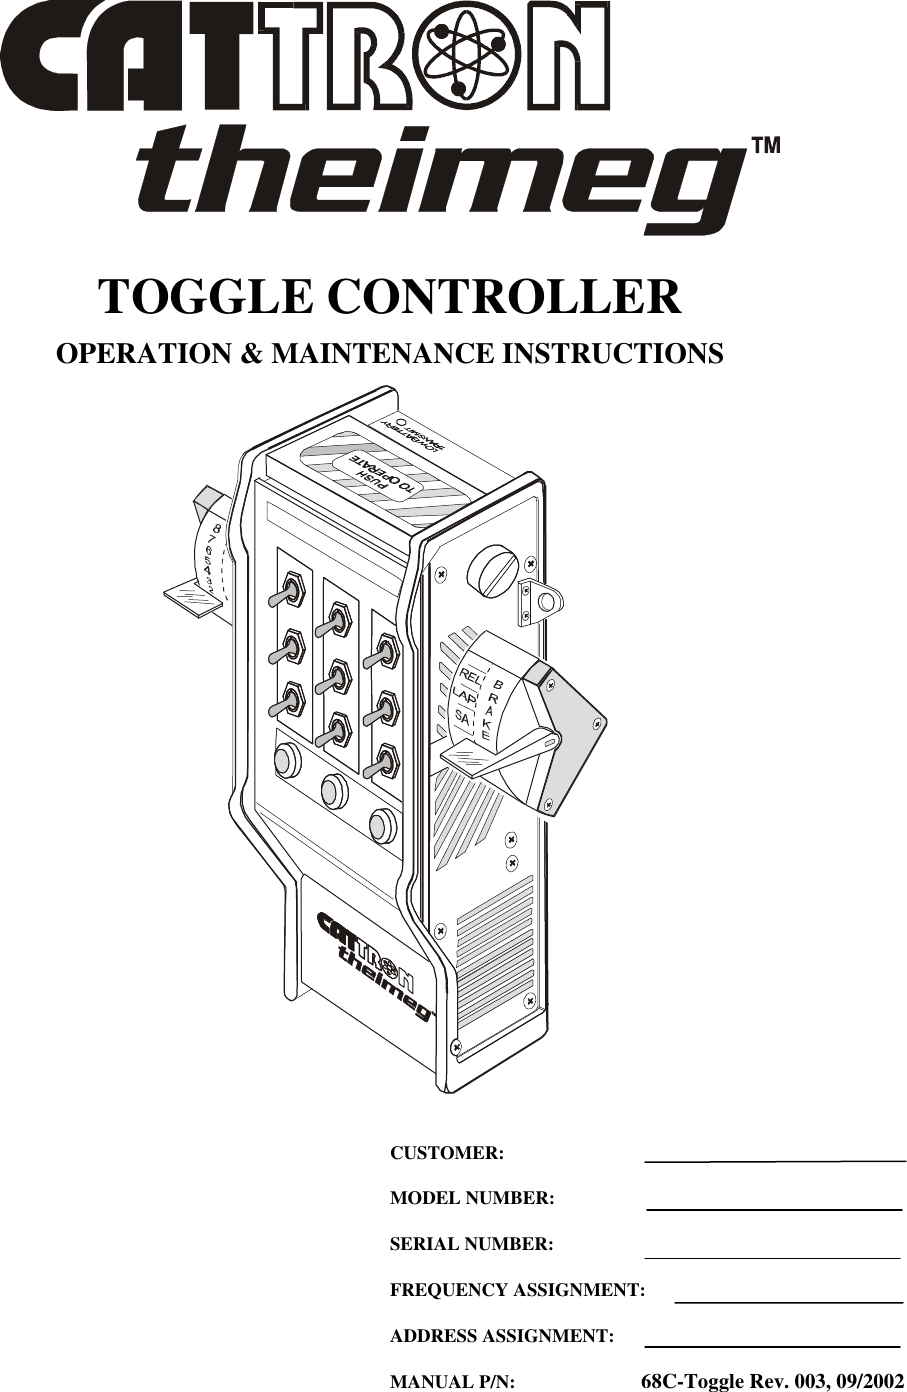    TOGGLE CONTROLLER OPERATION &amp; MAINTENANCE INSTRUCTIONS   CUSTOMER: MODEL NUMBER: SERIAL NUMBER: FREQUENCY ASSIGNMENT: ADDRESS ASSIGNMENT: MANUAL P/N:          68C-Toggle Rev. 003, 09/2002 